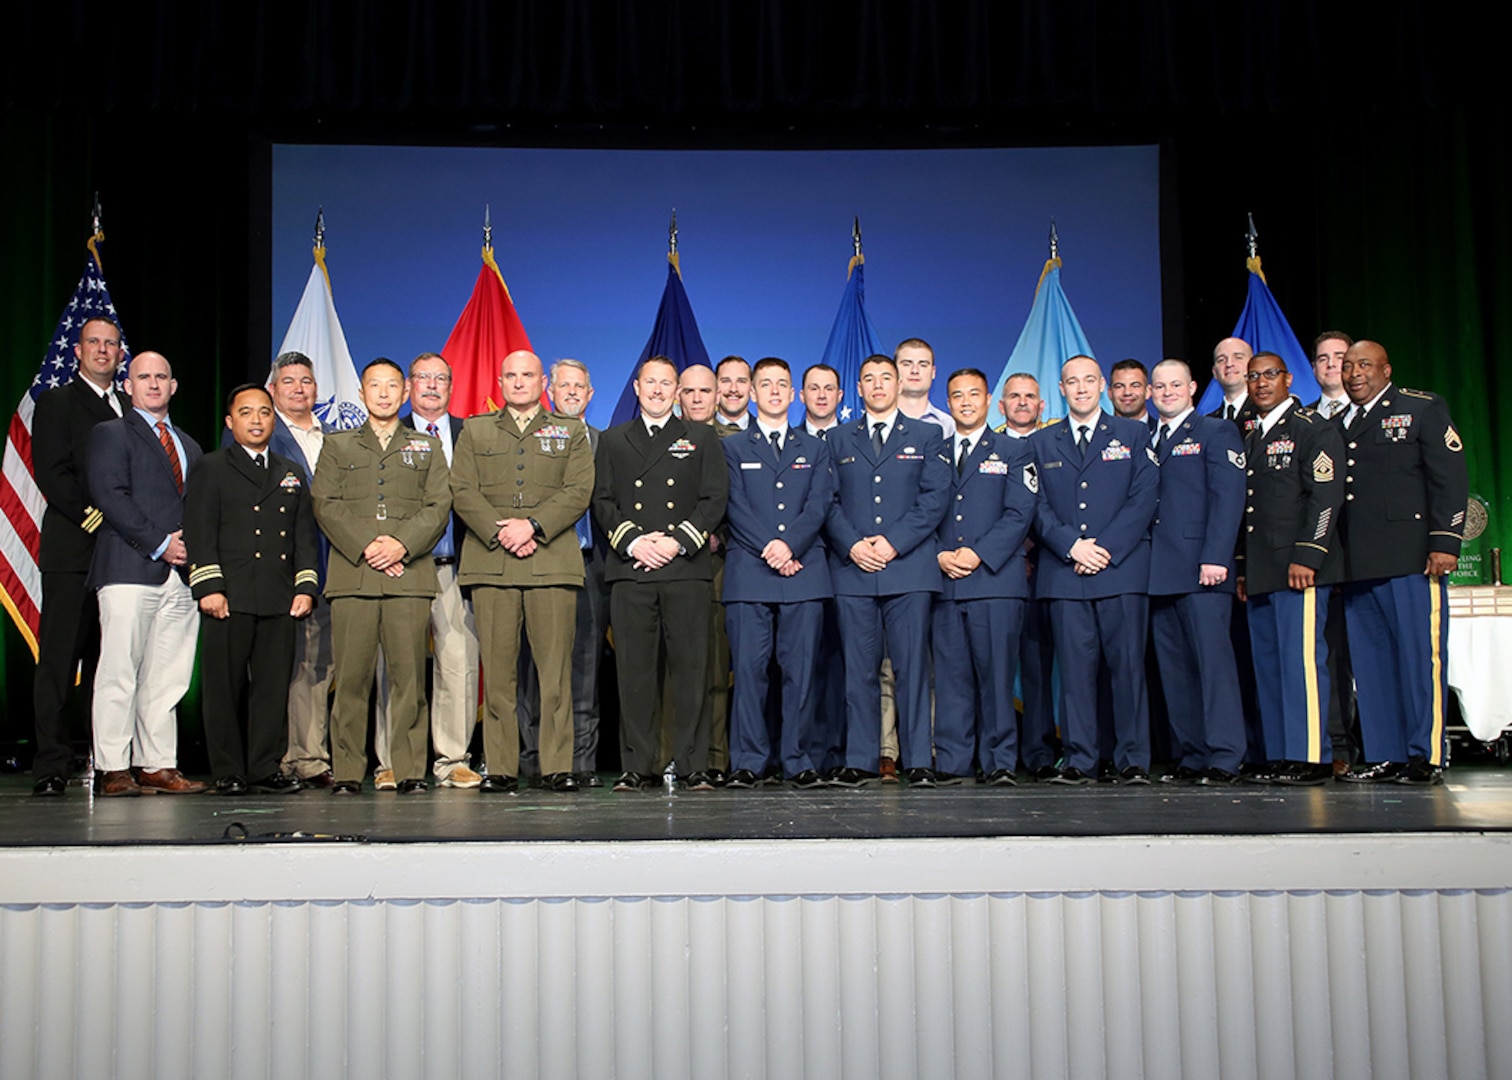 Winners of the 2017 Department of Defense Fuels Awards pose for a group photo following the awards ceremony April 11 at the Defense Logistics Agency Energy Worldwide Energy Conference at the Gaylord National Hotel and Conference Center in National Harbor, Maryland. The awards recognized individual and unit excellence in fuels management and handling. 